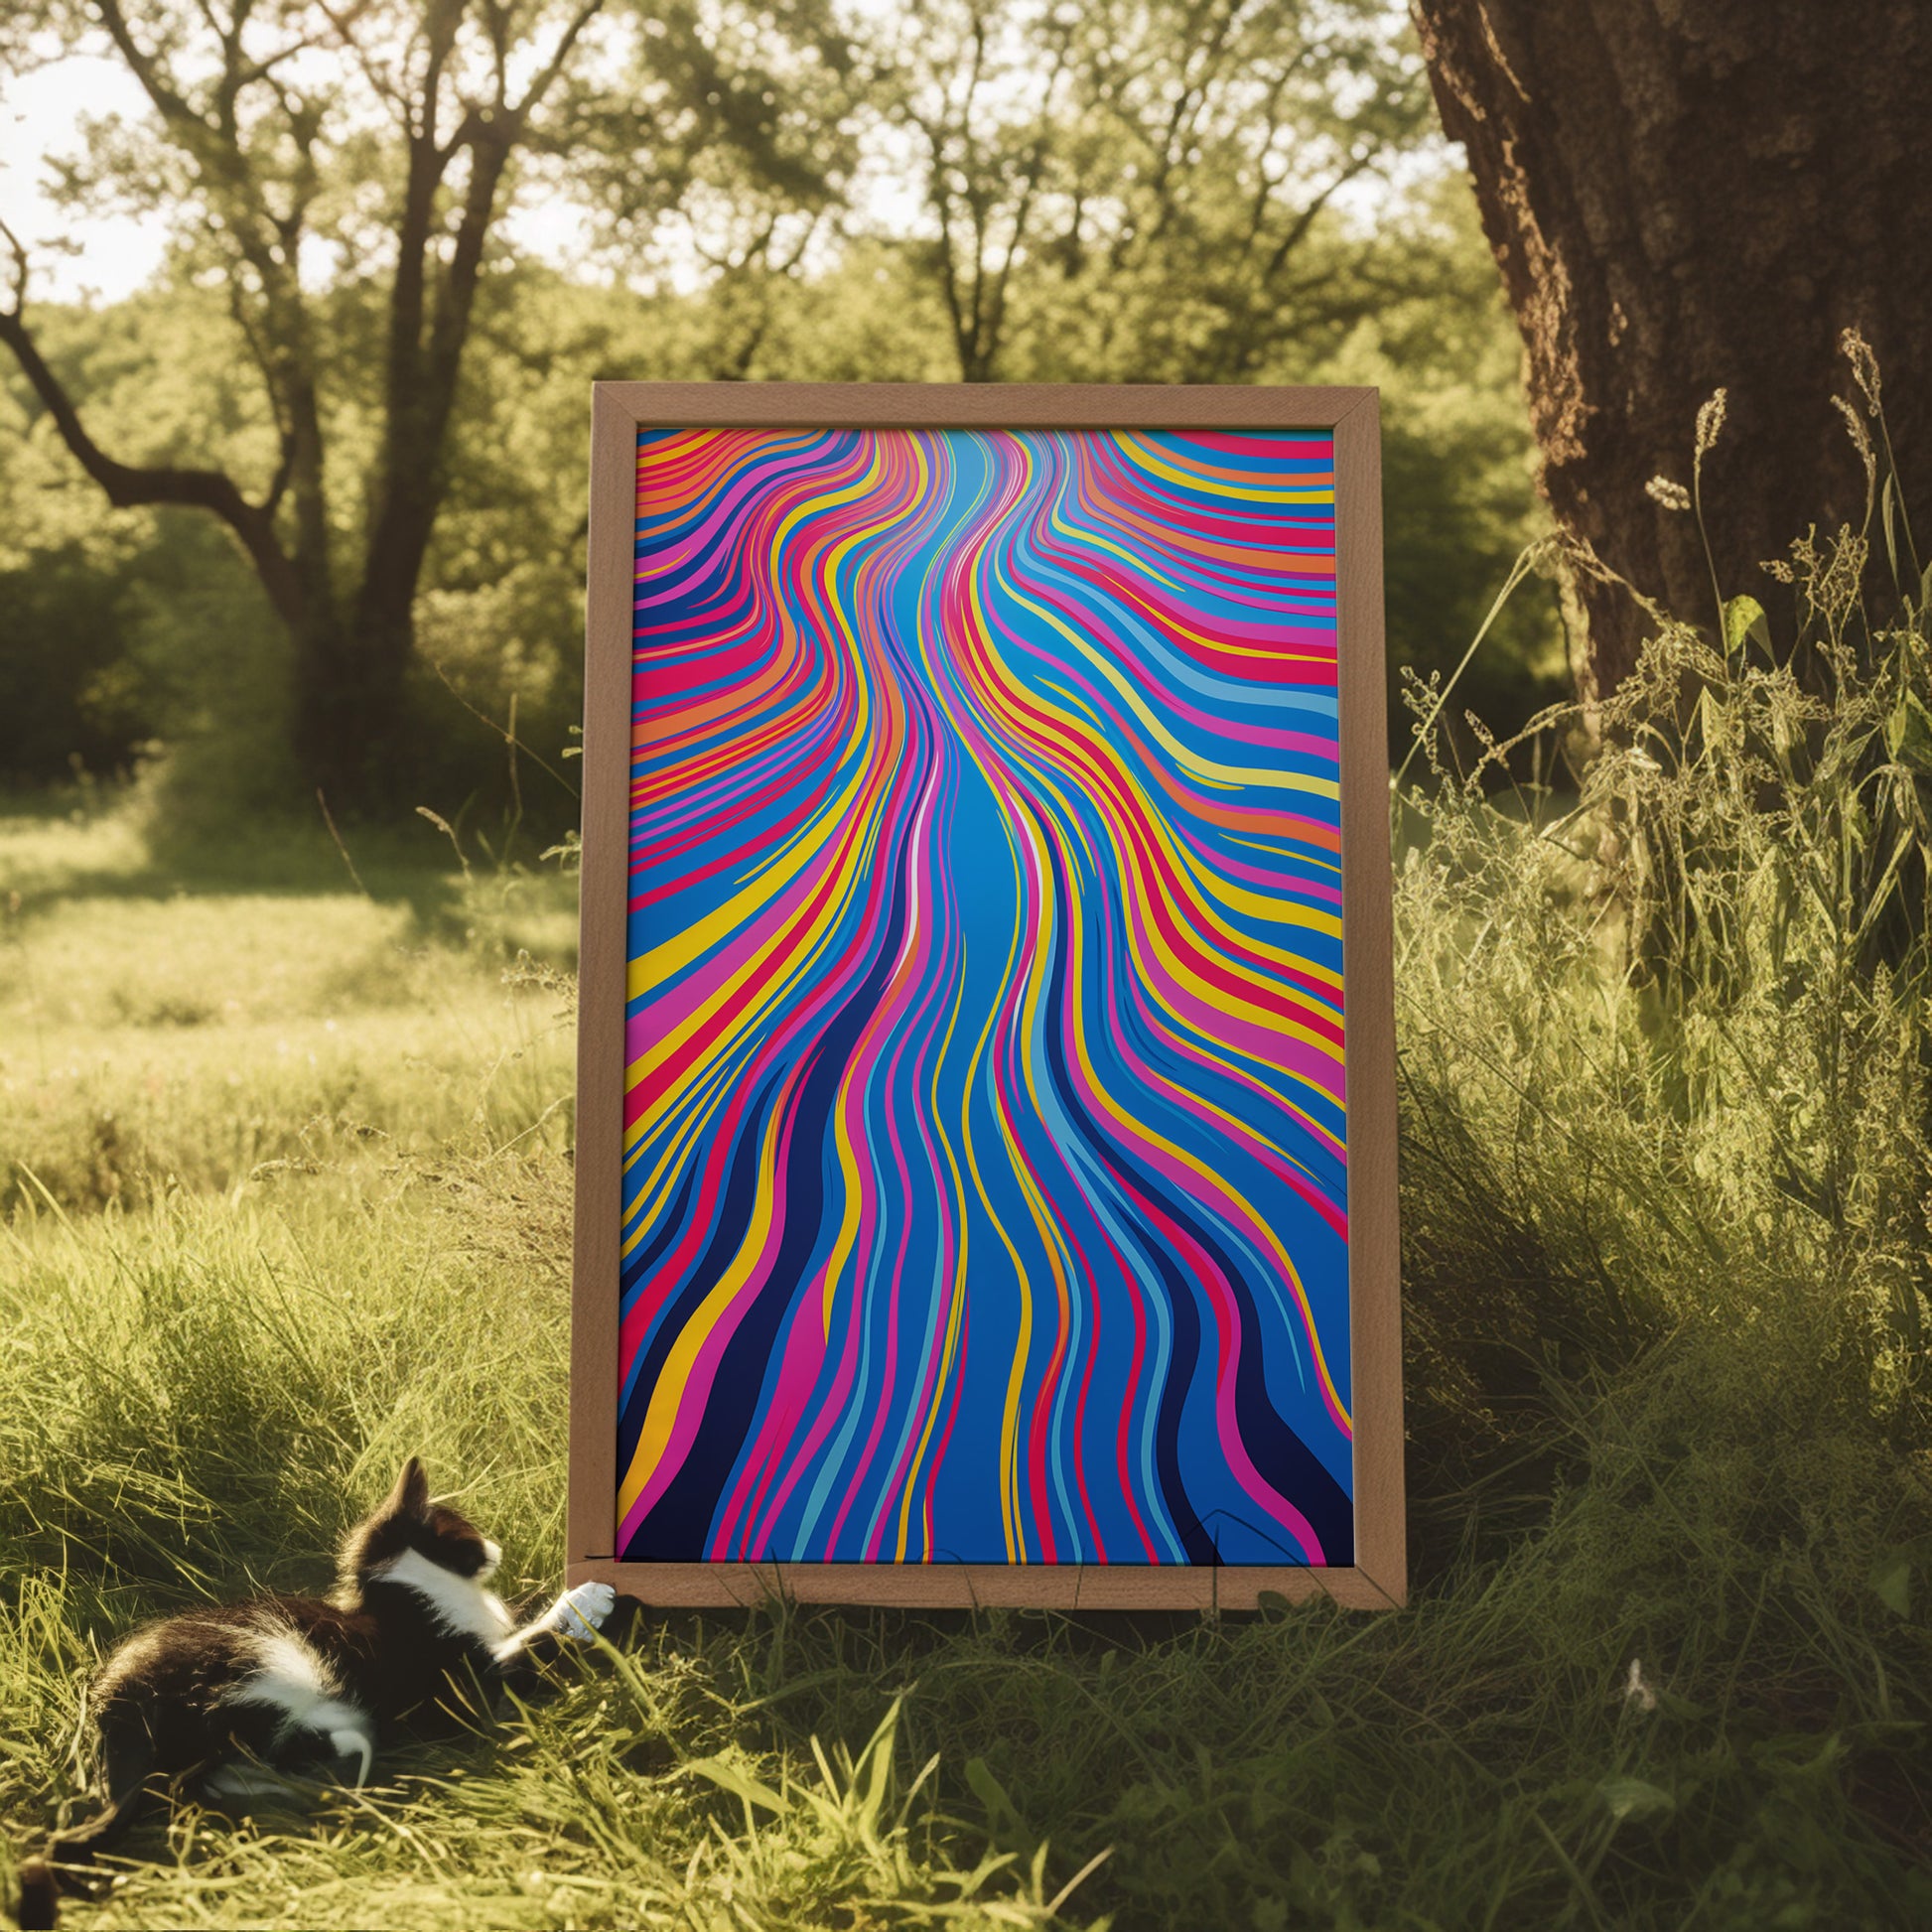 Abstract colorful wavy artwork on easel in a sunlit grassy field with a cat lounging nearby.